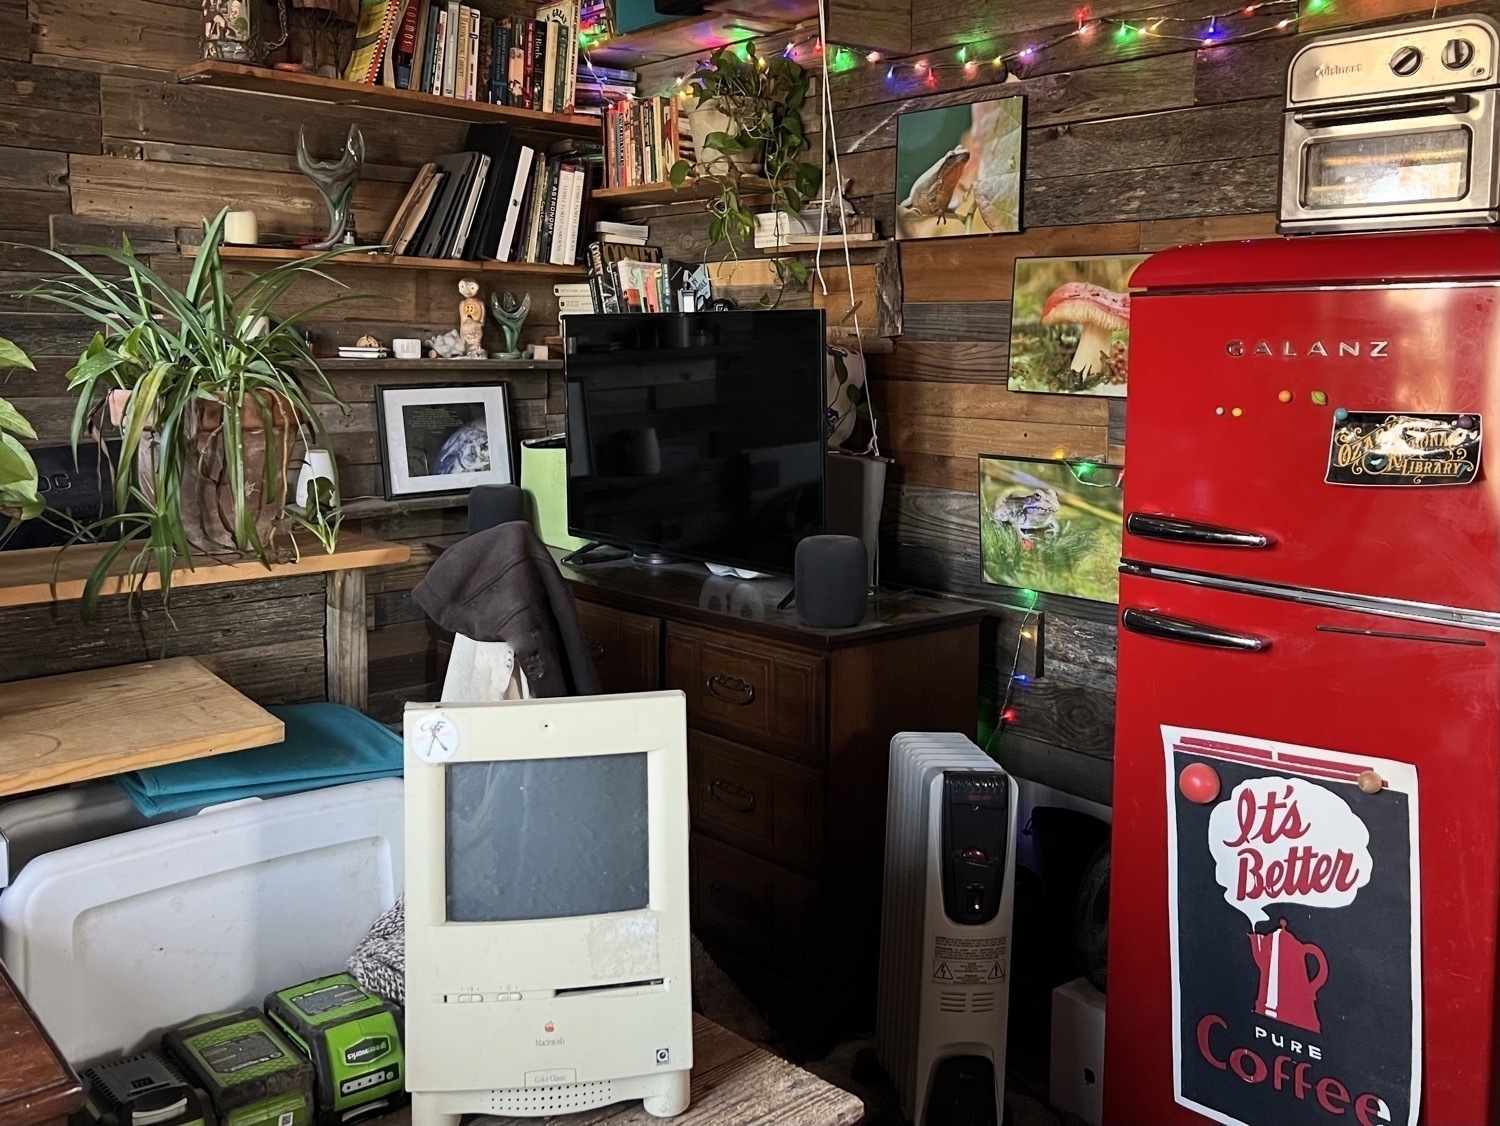 A tiny house interior with wood plank walls. On the right of the image a ed refrigerator with an Air fryer on top. To the left Of that a flat screen tv on a piece of wood furniture. There are shelves with book and photos of frogs on the walls. In the foreground an old Mac Color Classic sits on a small table next to some shelves with plants.